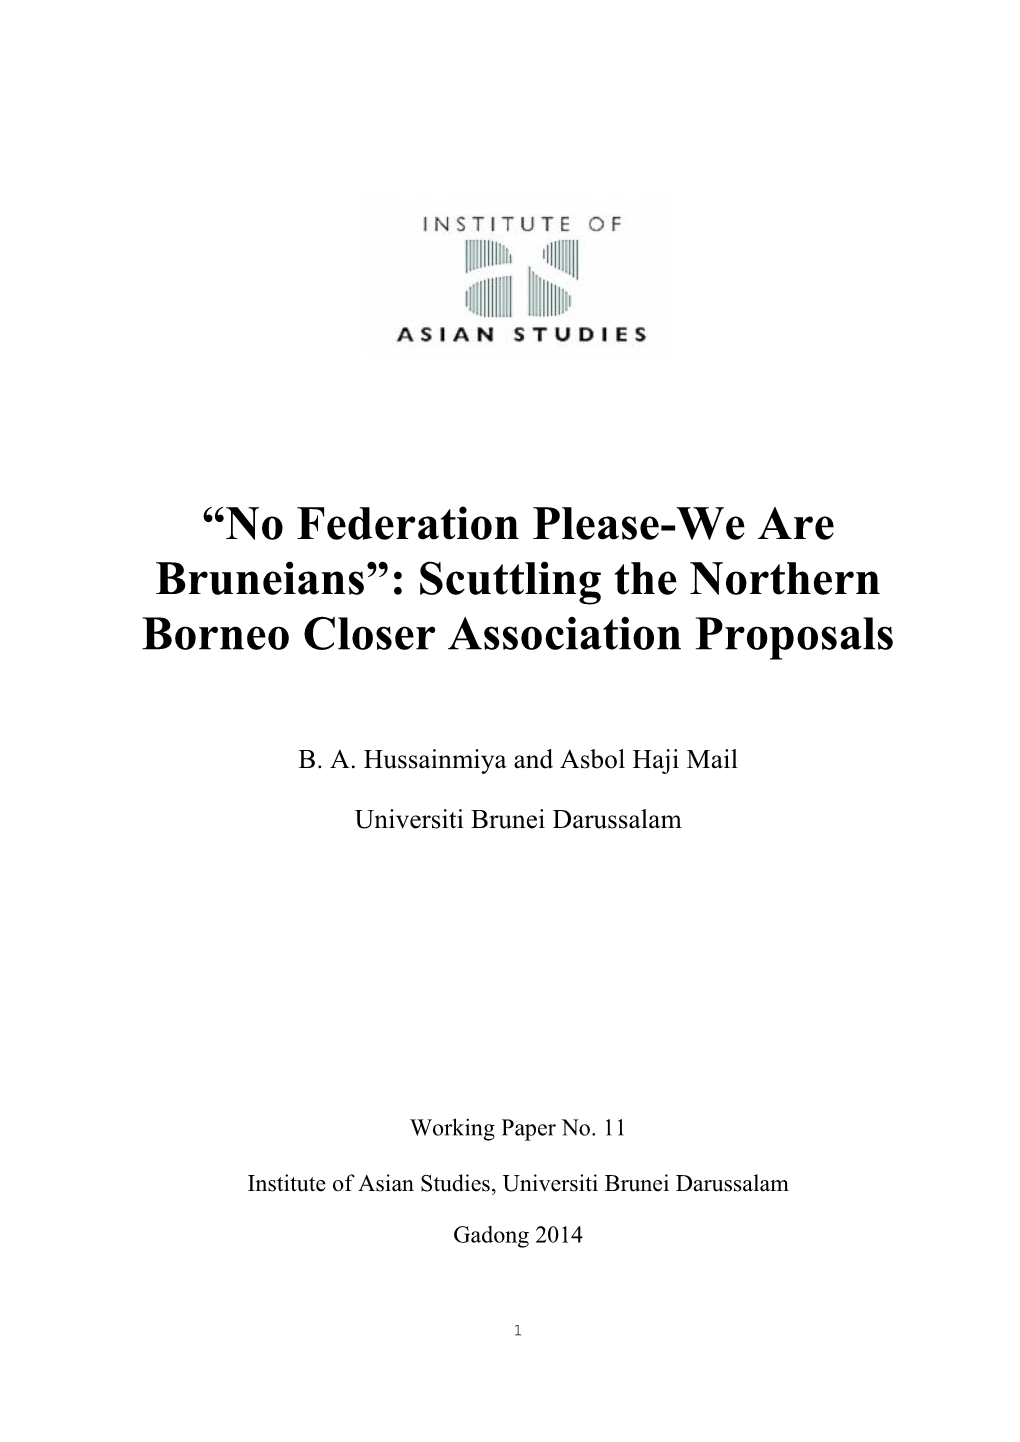 Scuttling the Northern Borneo Closer Association Proposals